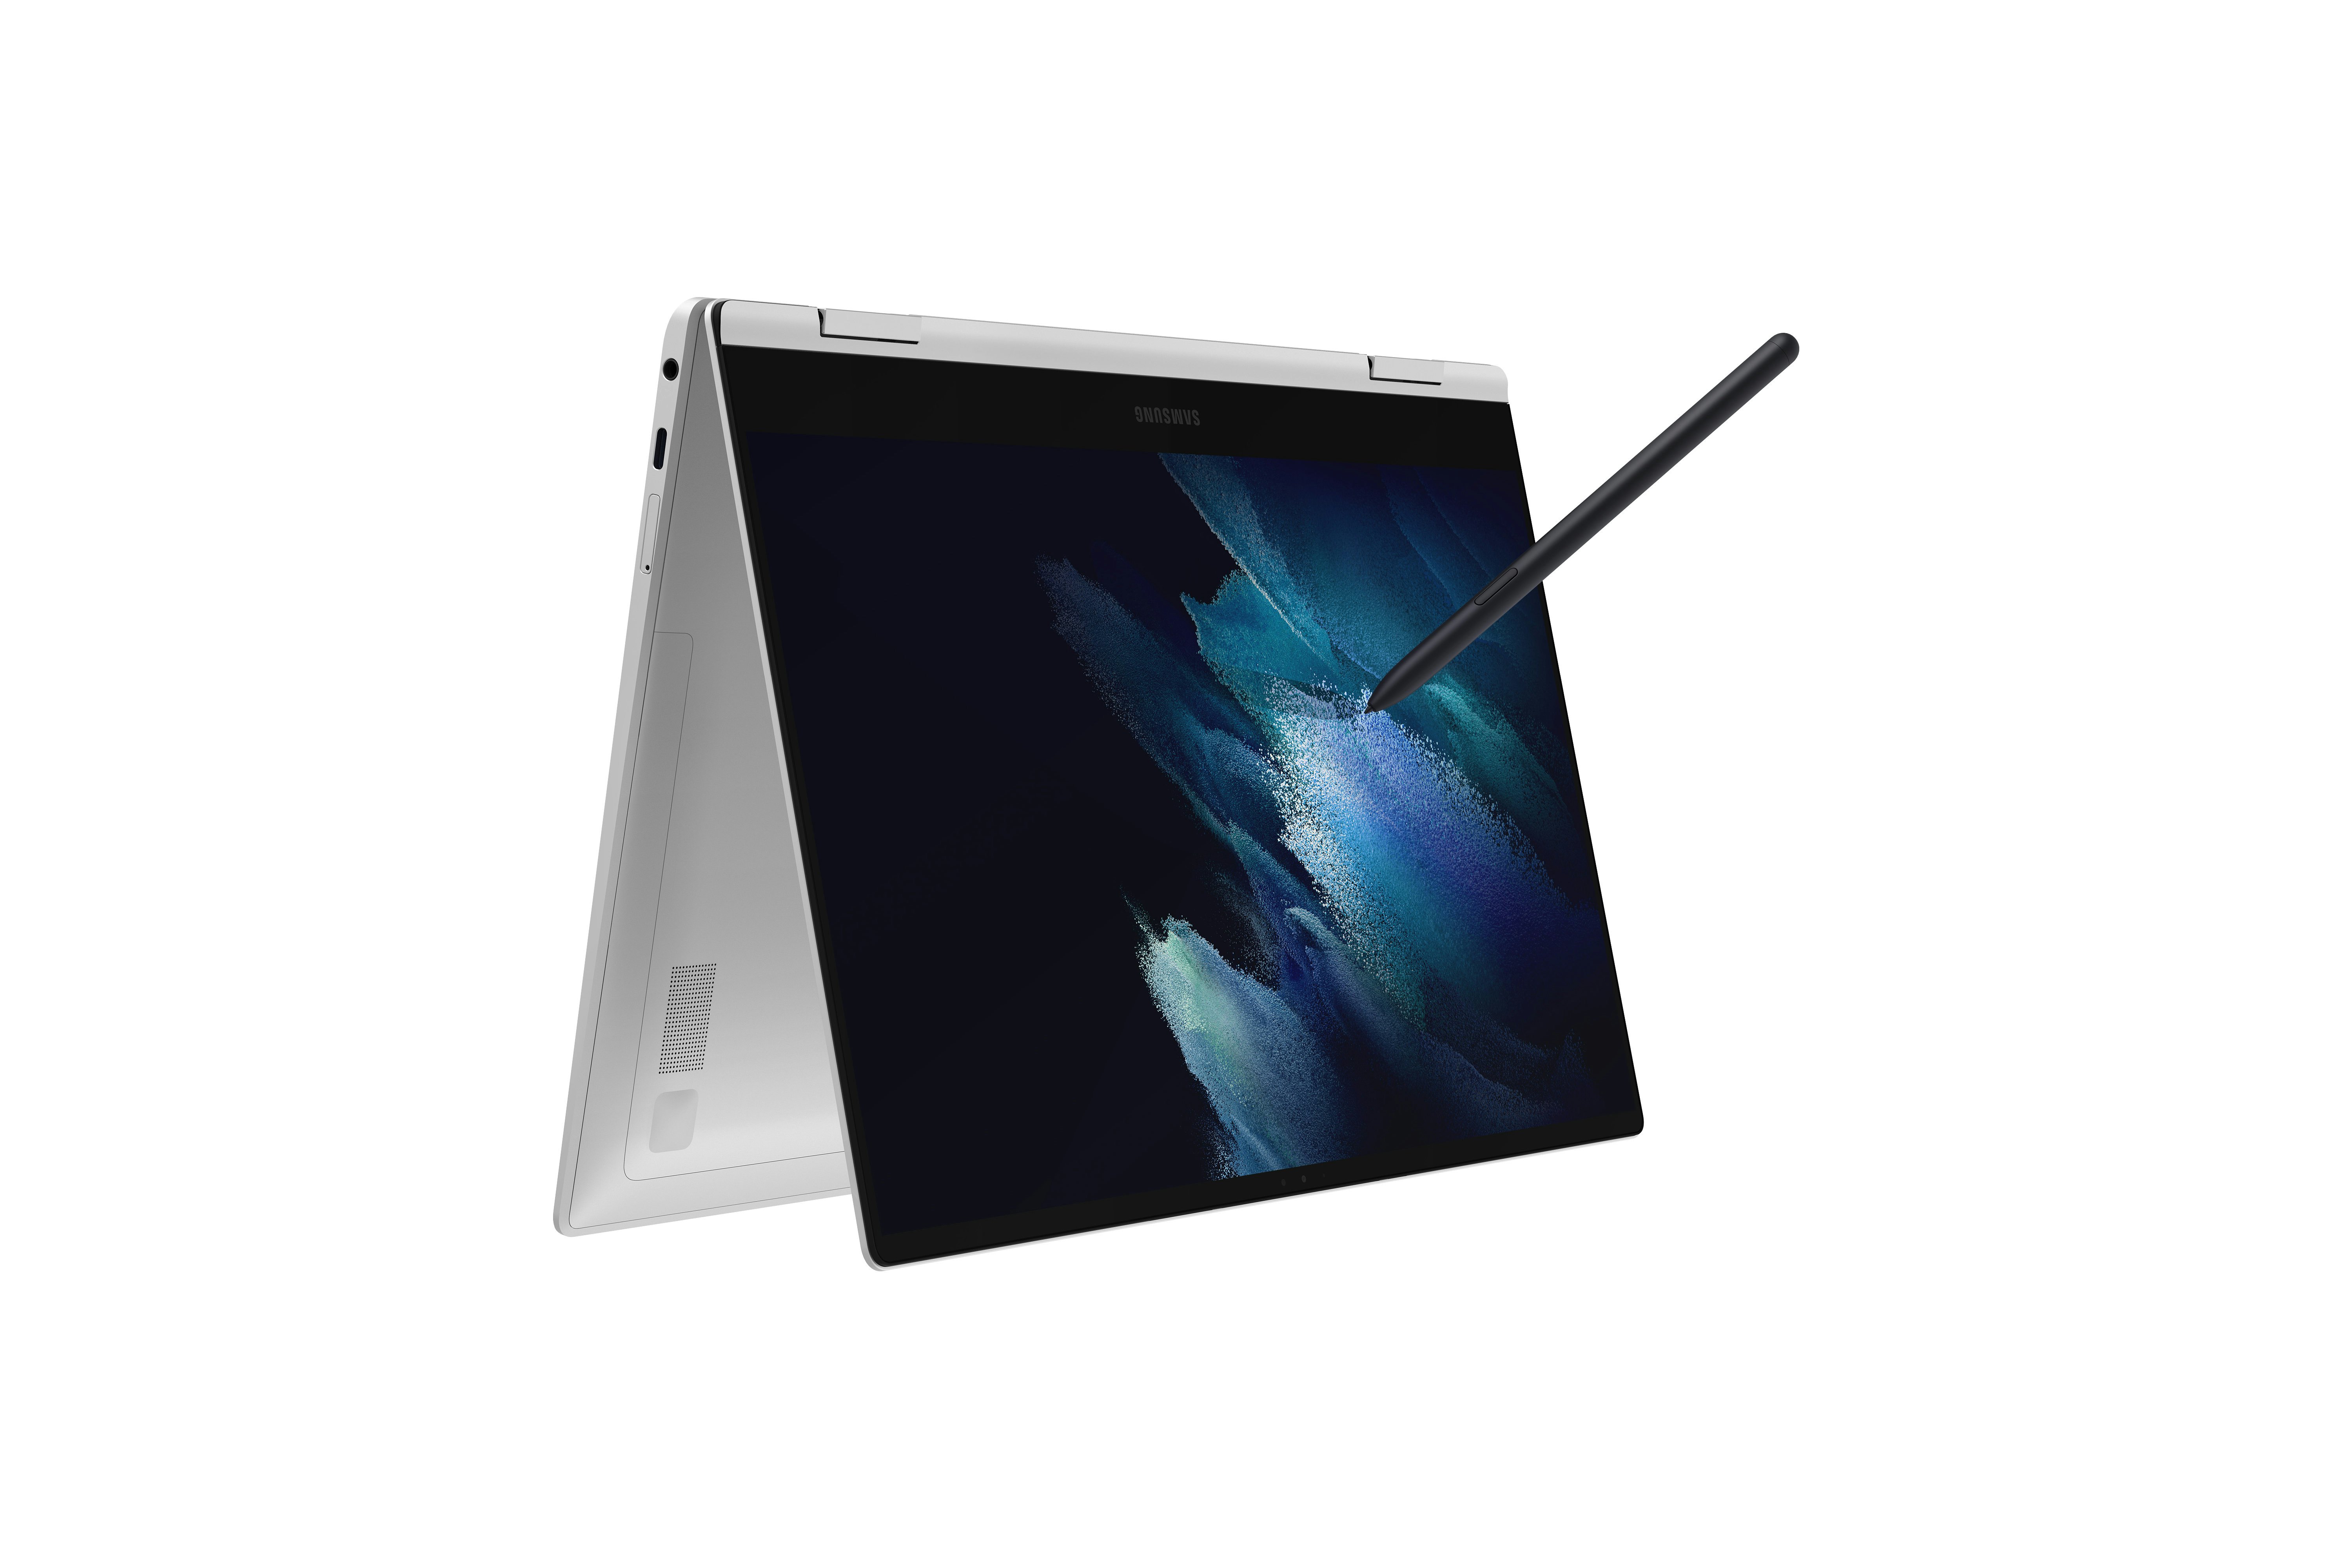 How to Use the S Pen With a Galaxy Book Pro 360